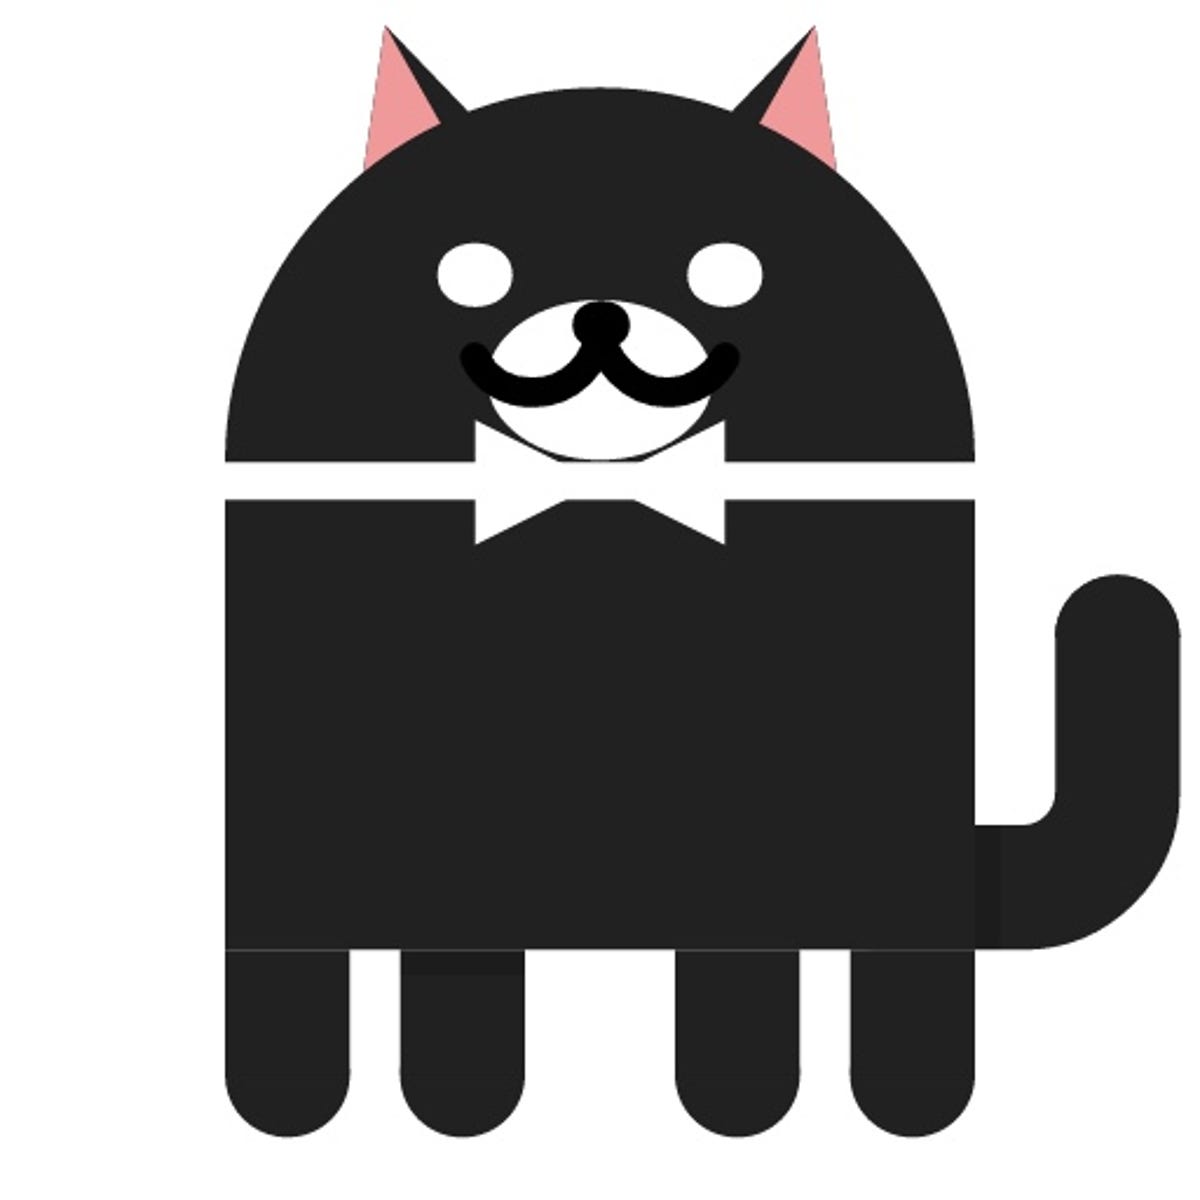 androidn-game-mr-meowstoffelees.jpg